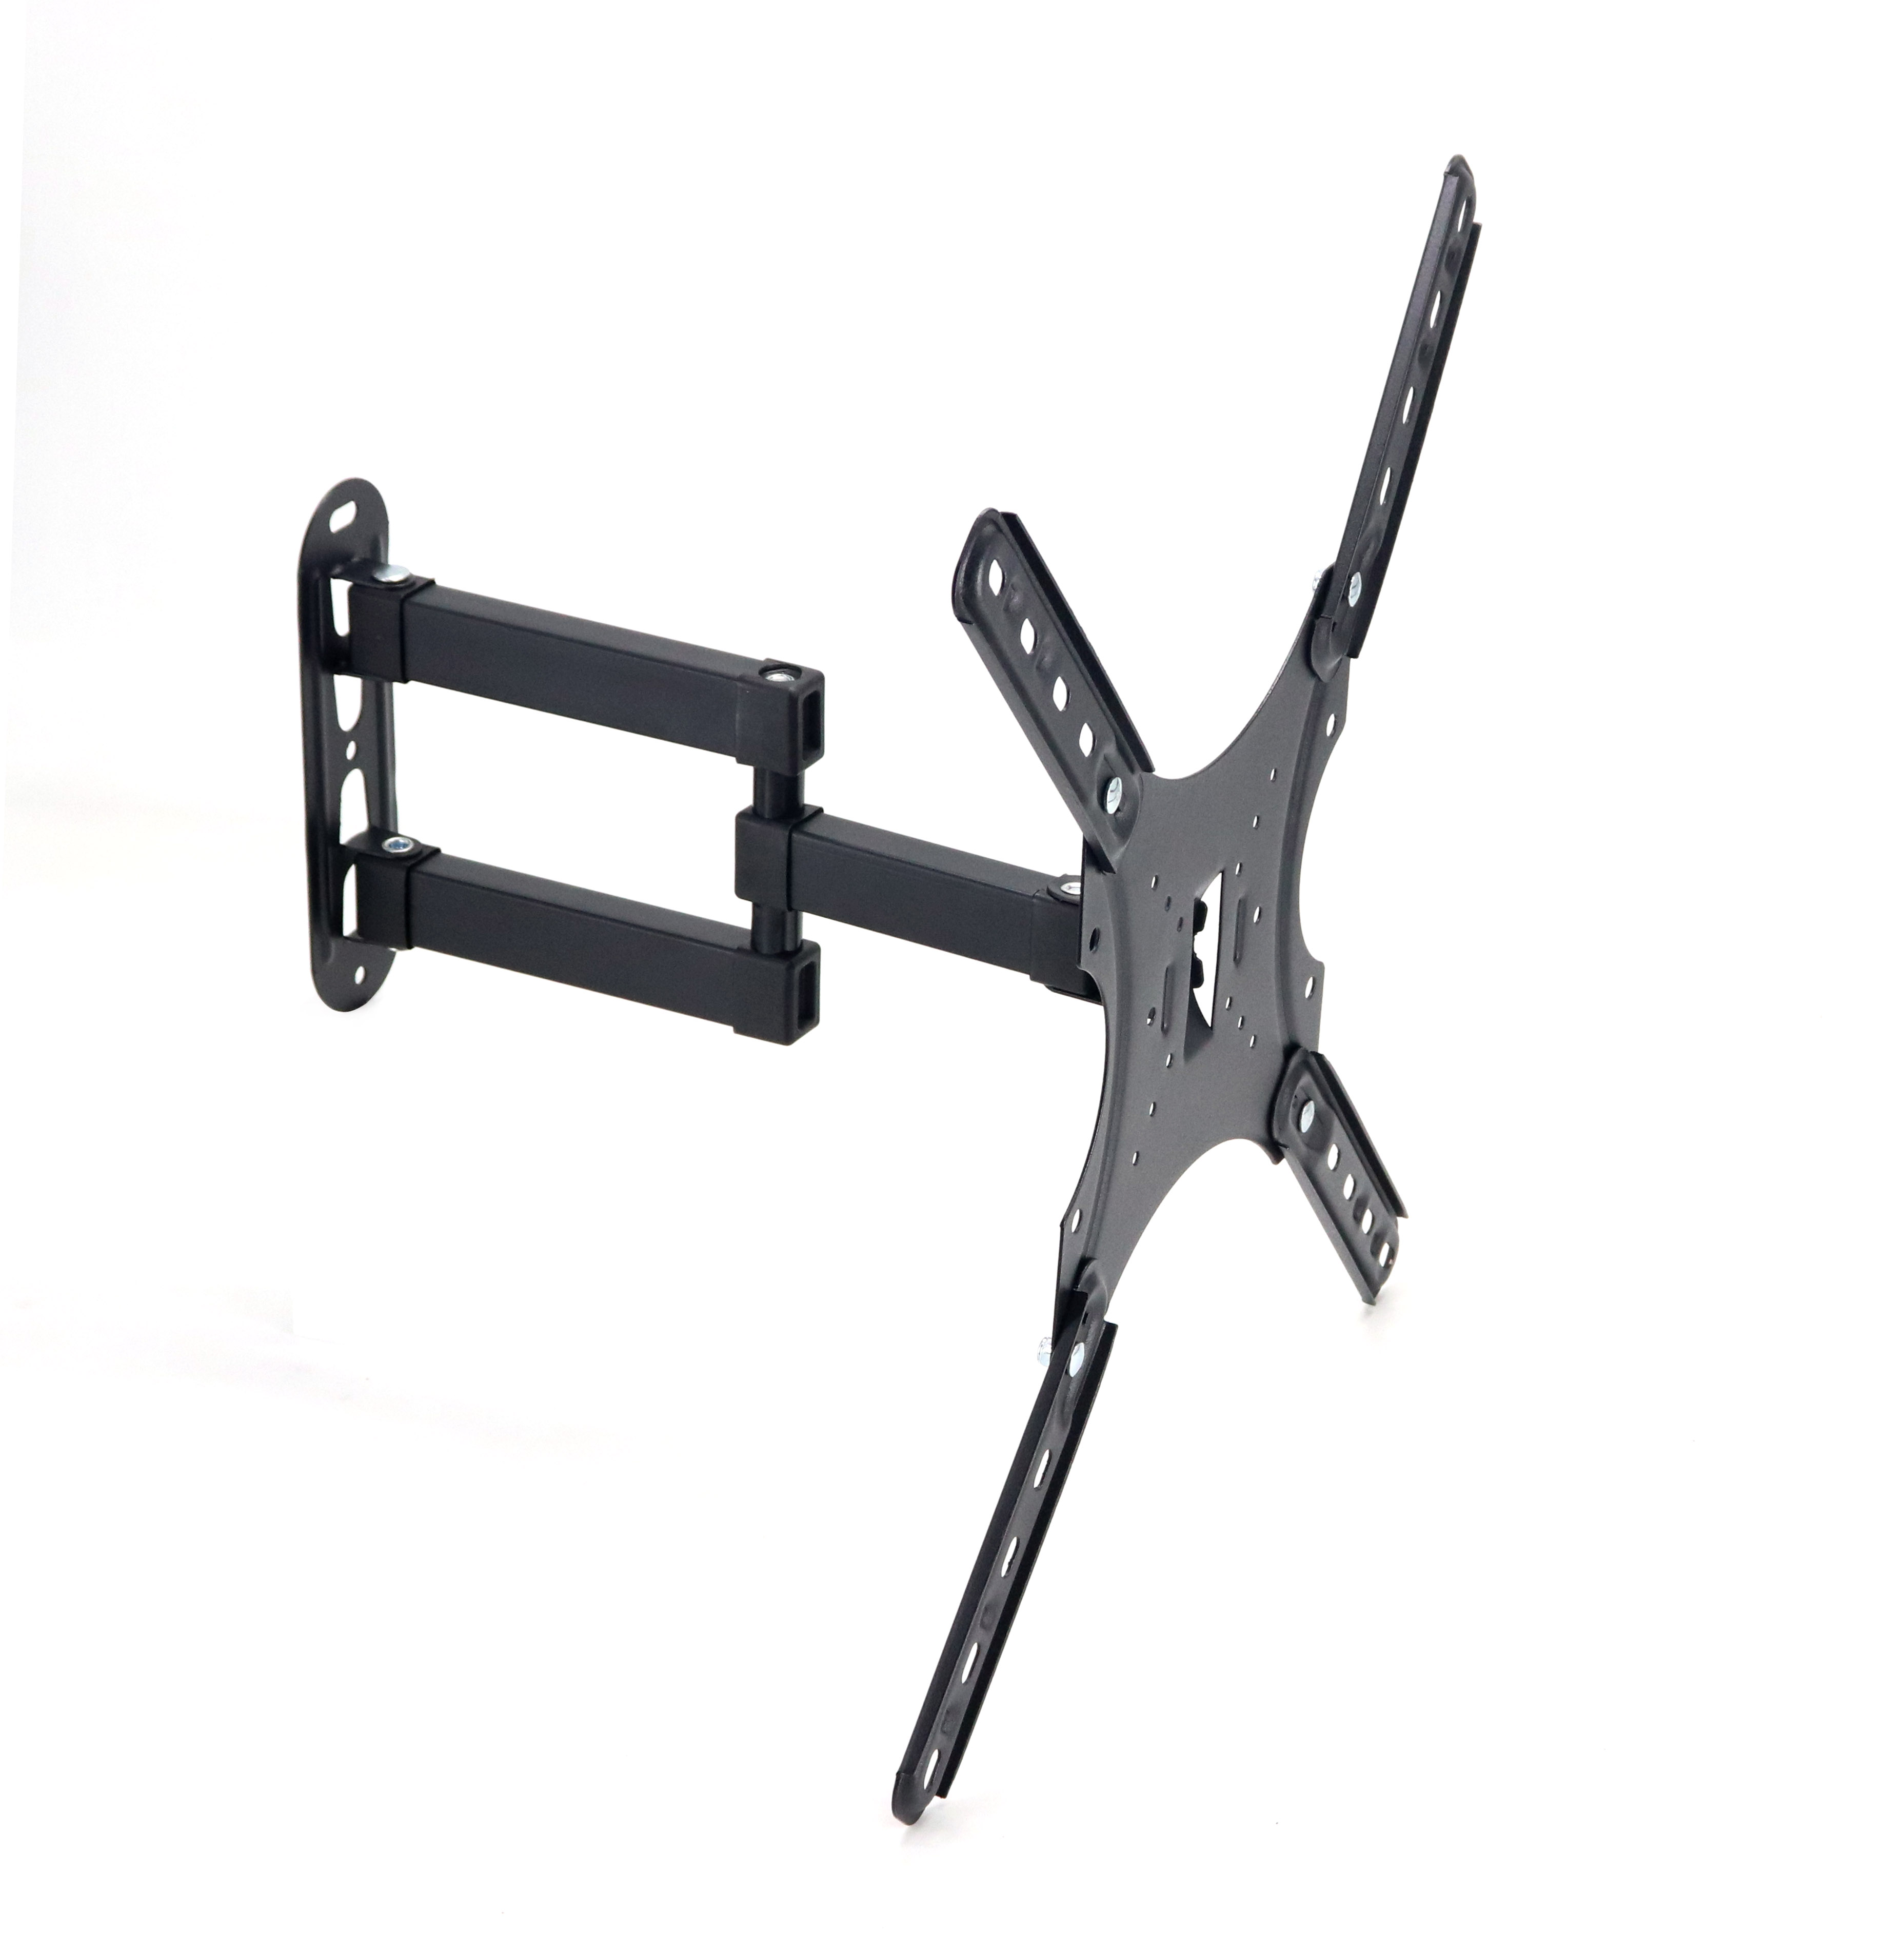 TV Wall Mount Monitor Wall Stand for 14-55 inch Screens up to 15KG with Swivel and Extension Arm,Max VESA 400x400mm